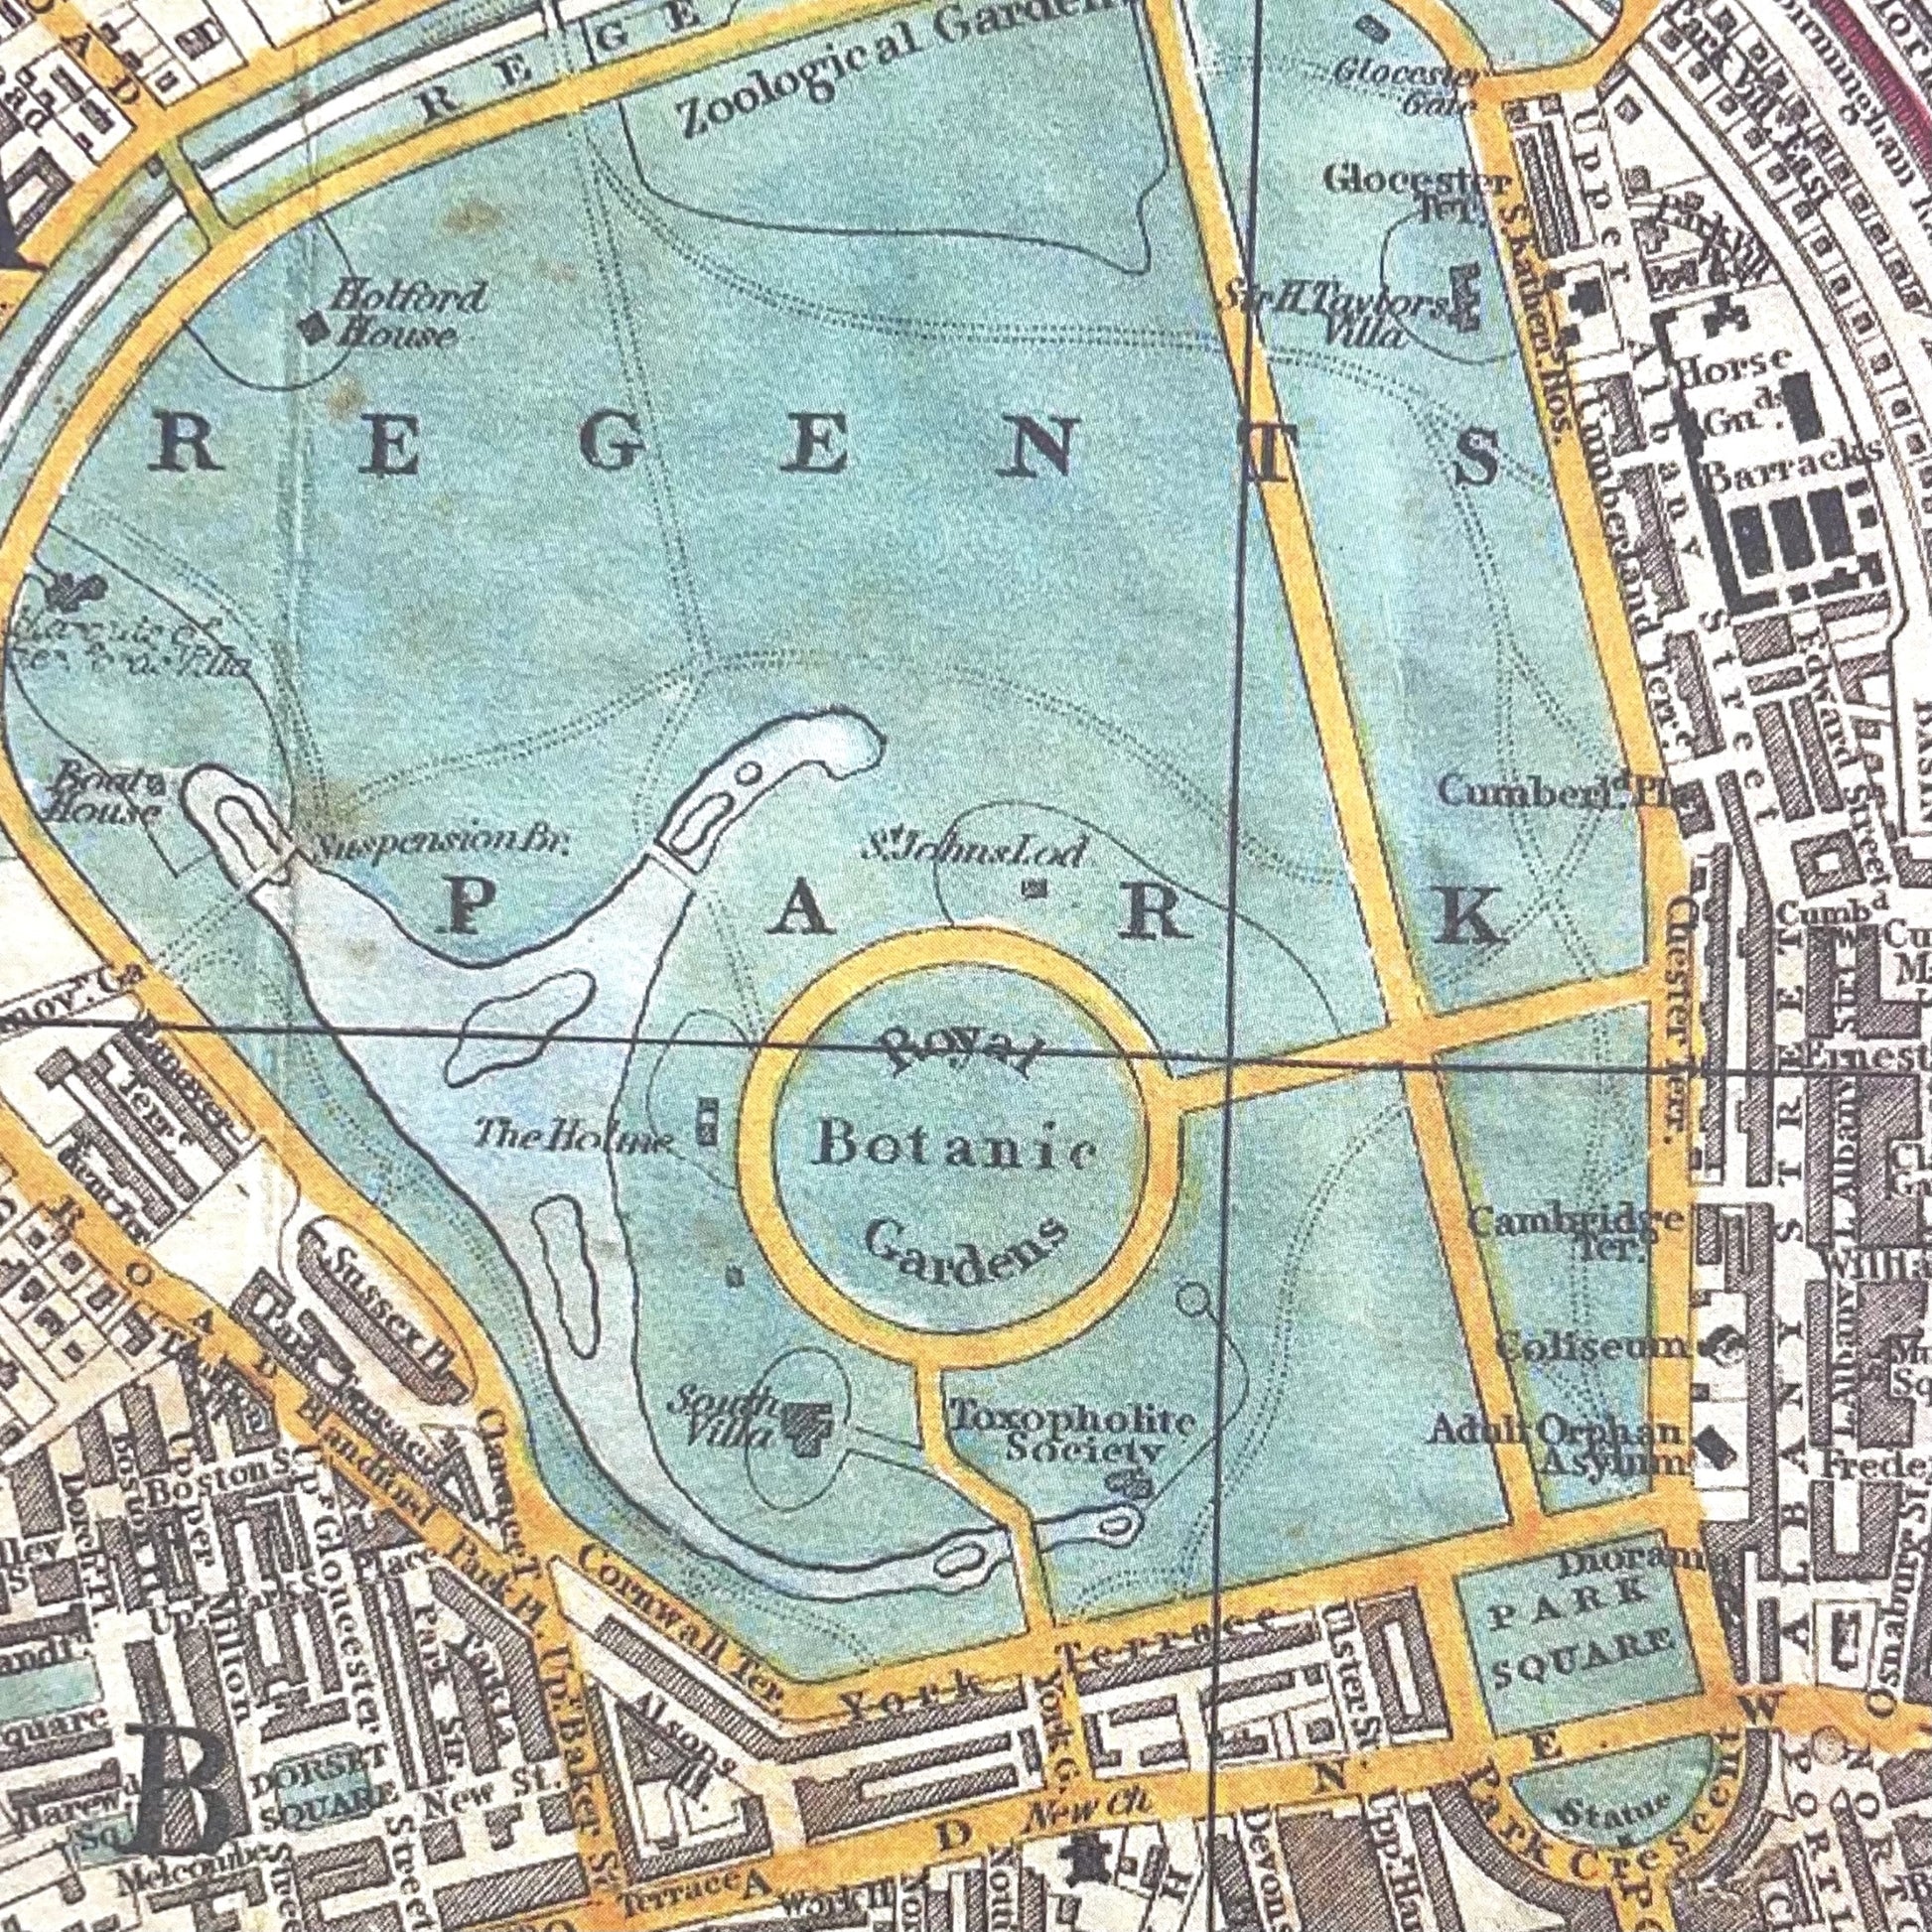 Wrapping paper with a vintage map of London (1848) by George Federick Cruchley. The map shows the proposed developments for London at this time and extends from Hyde Park in the west to the Docklands in the East, detail of Regents Park